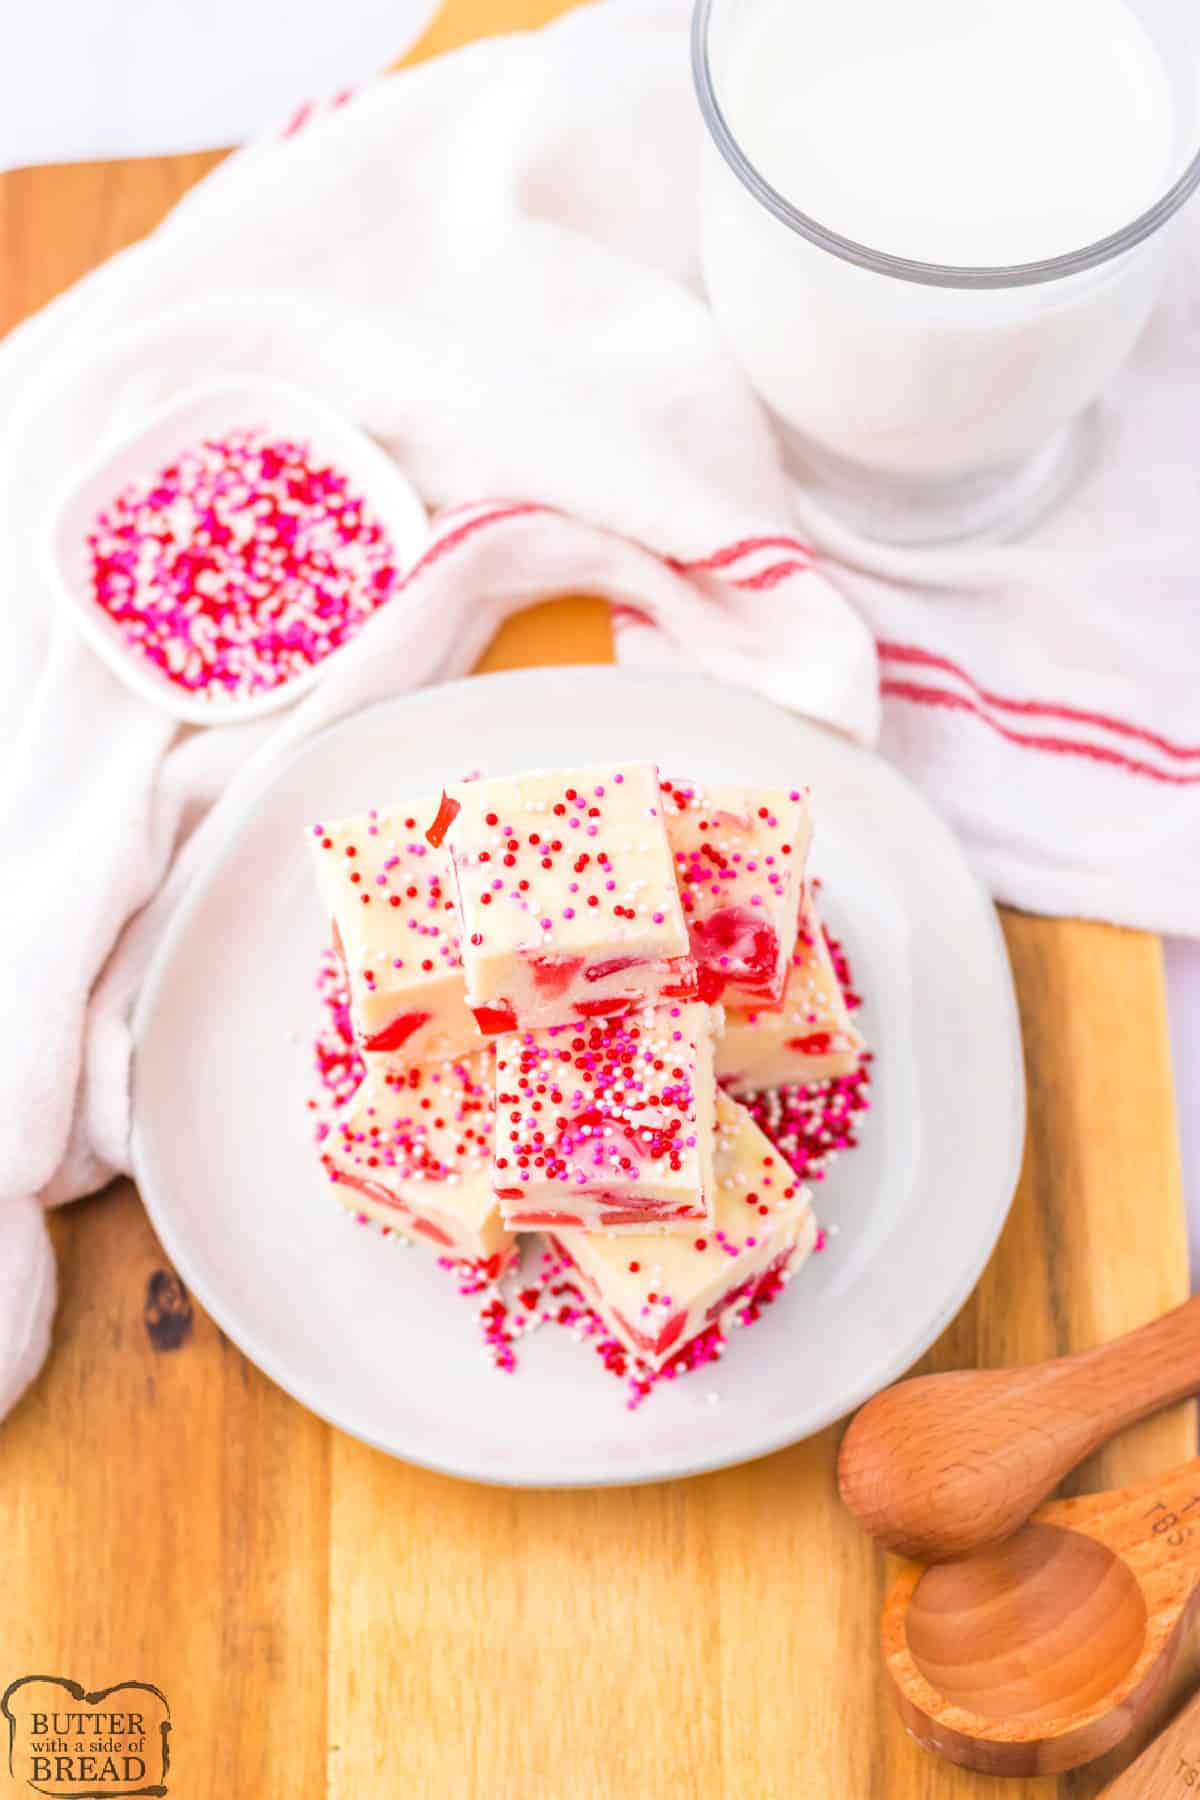 White chocolate fudge with pink and red gumdrops.